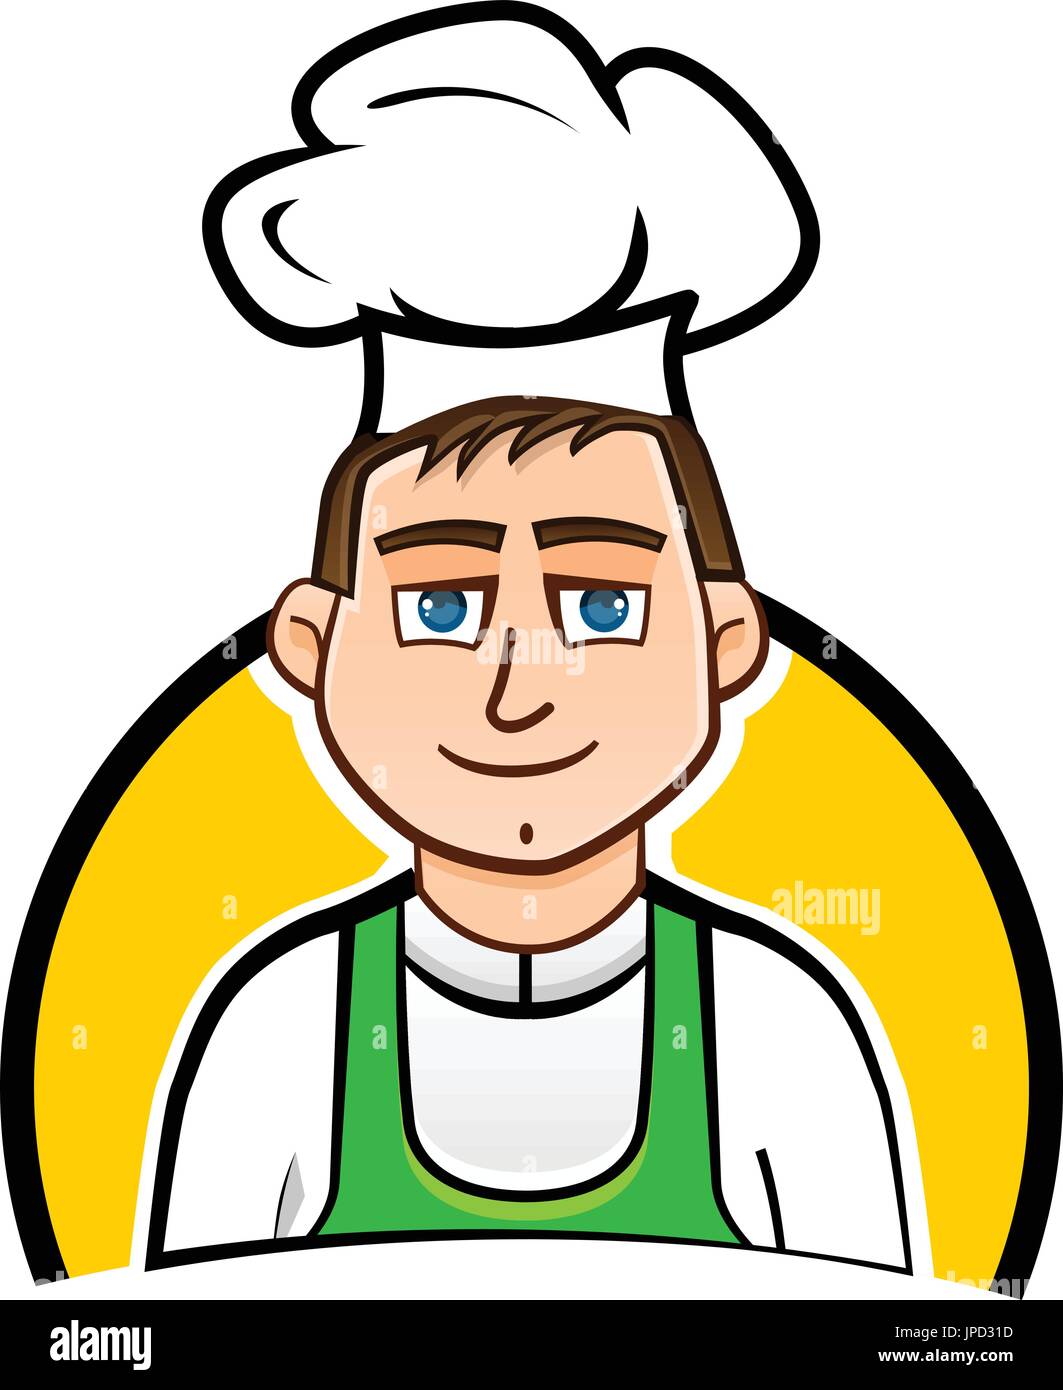 Isolated Male Chef Cartoon Design Stock Photos & Isolated Male Chef